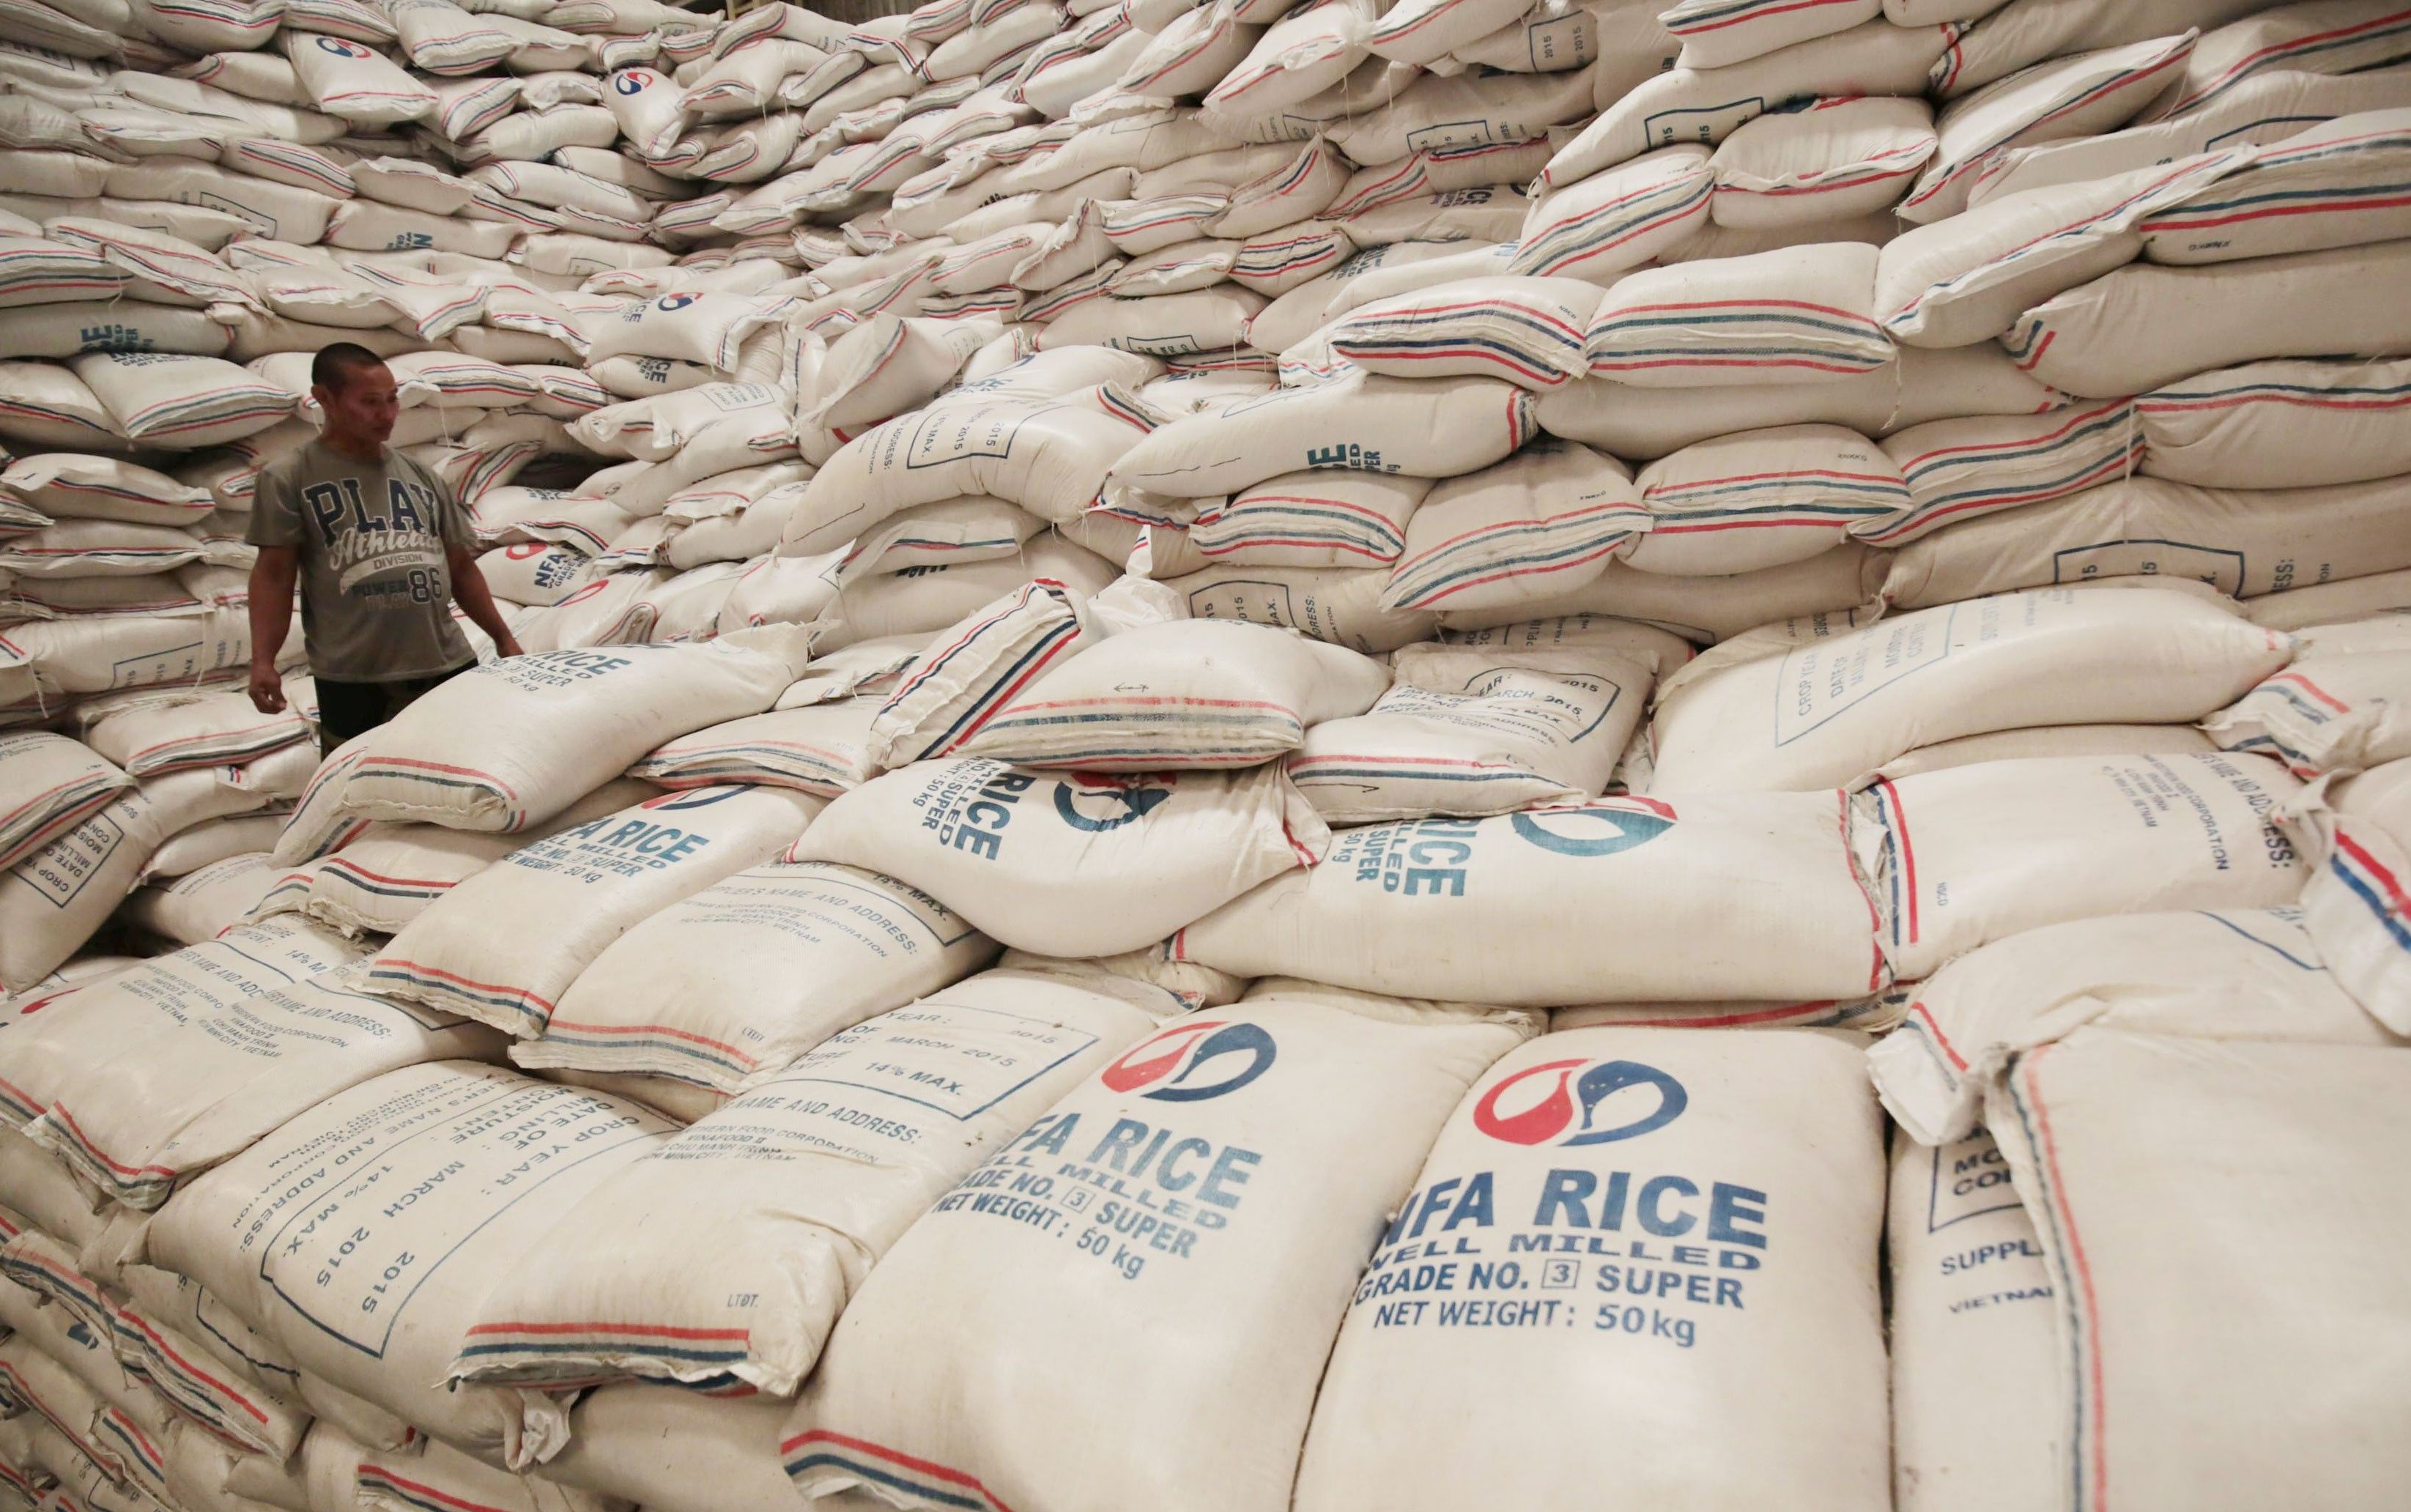 Thai, Singapore firms bag deal to supply 250,000 MT of rice